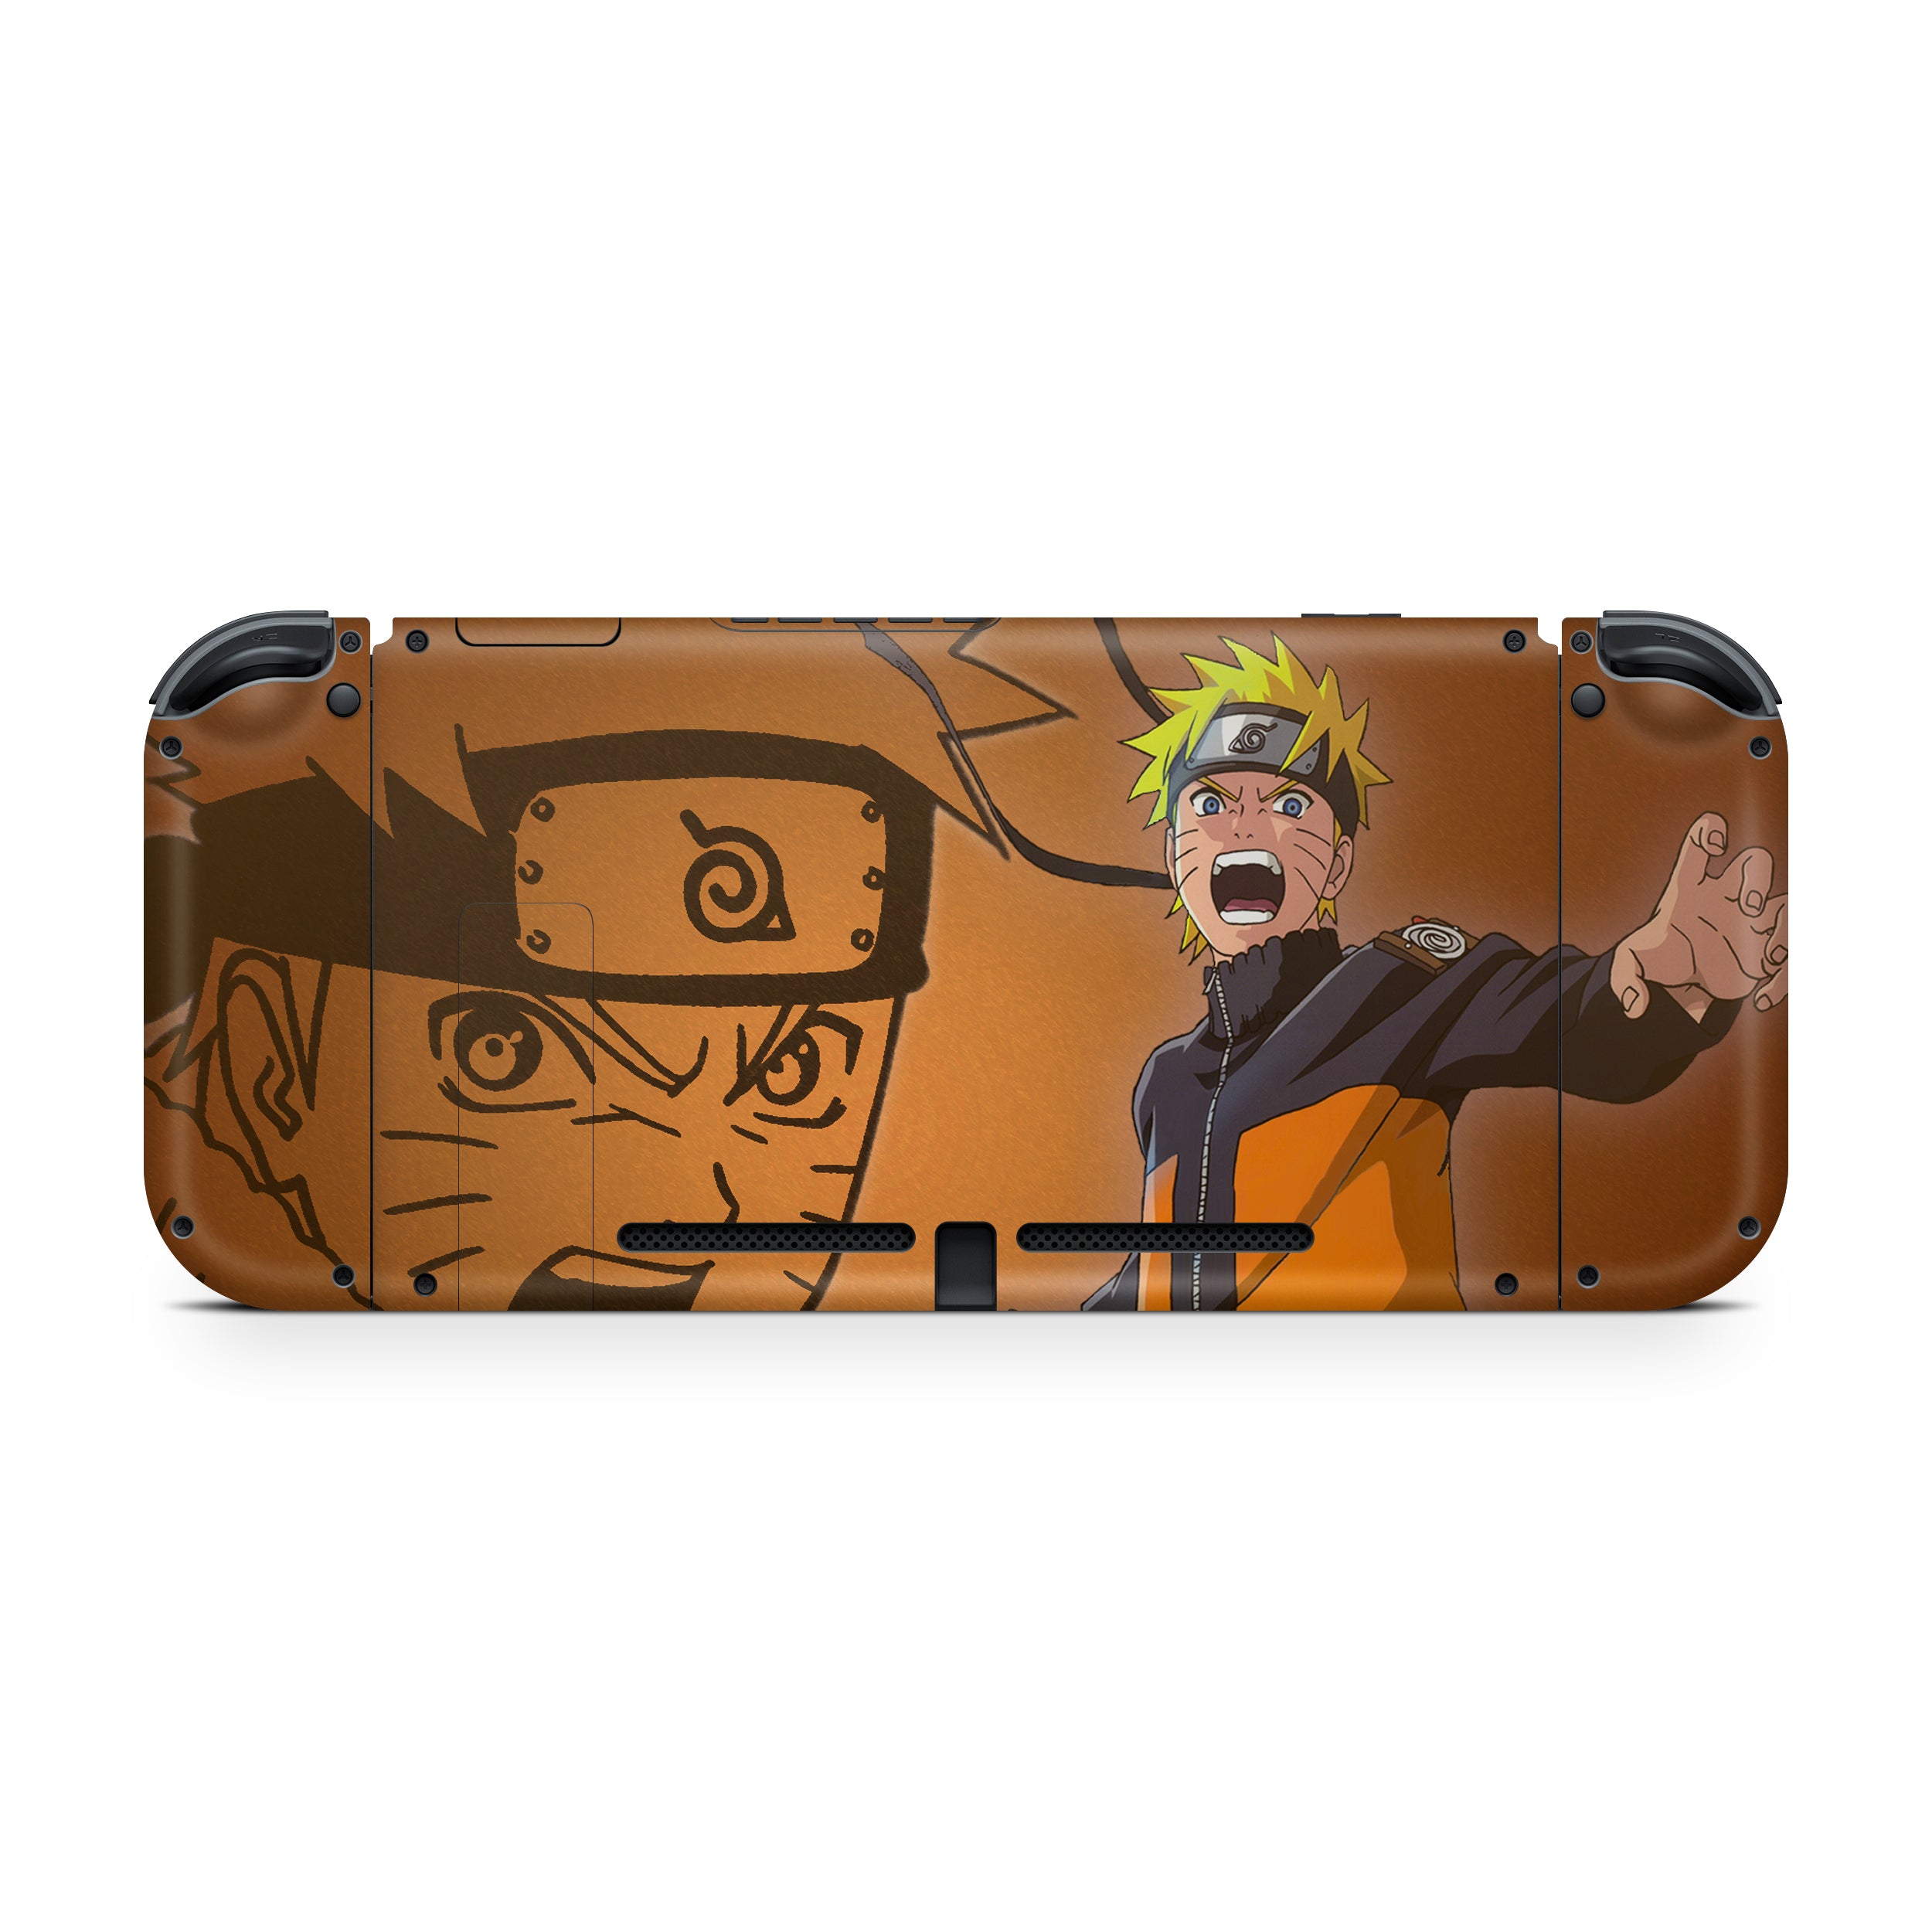 A video game skin featuring a Naruto design for the Nintendo Switch.